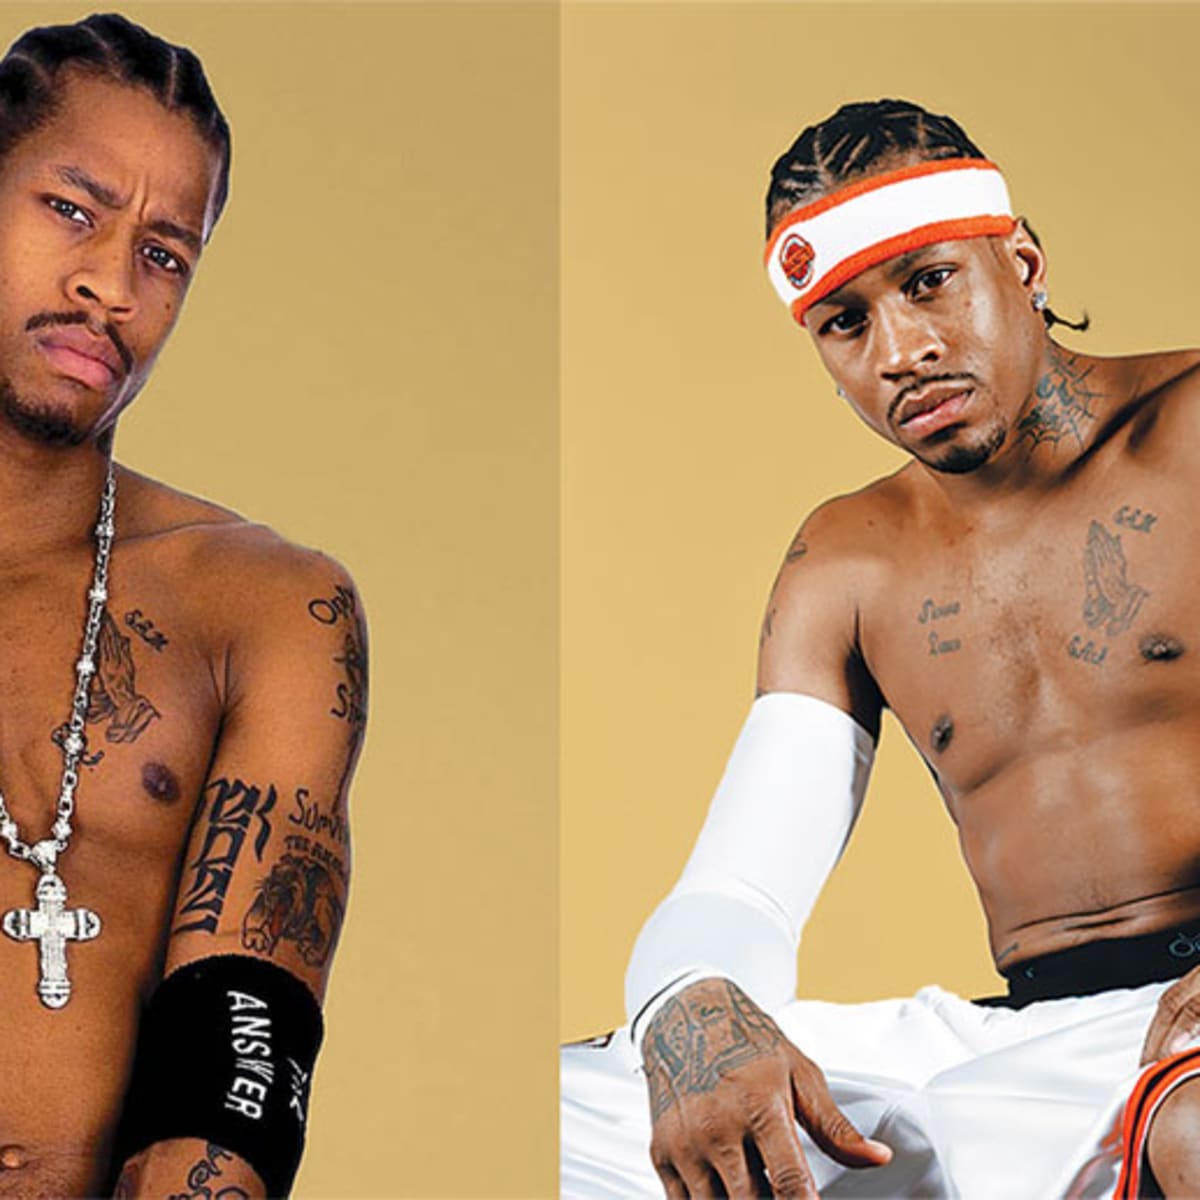 When the NBA airbrushed Allen Iverson's tattoos - Basketball